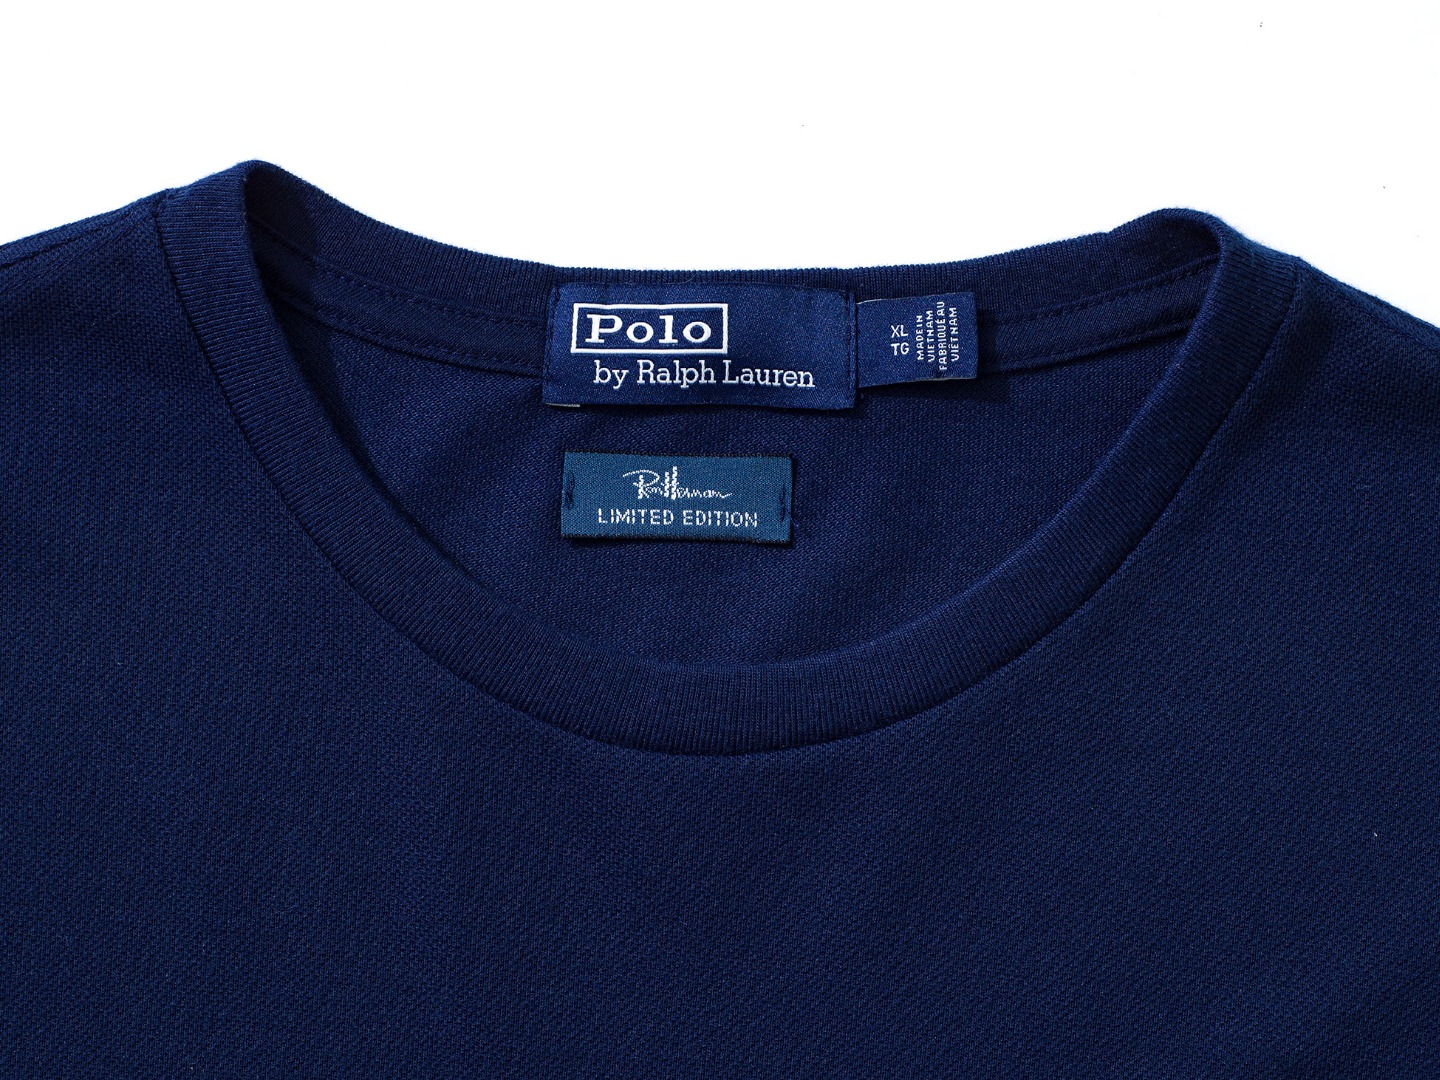 Polo Ralph Lauren for Ron Herman The Earth Polo 5.13(Sat) New 